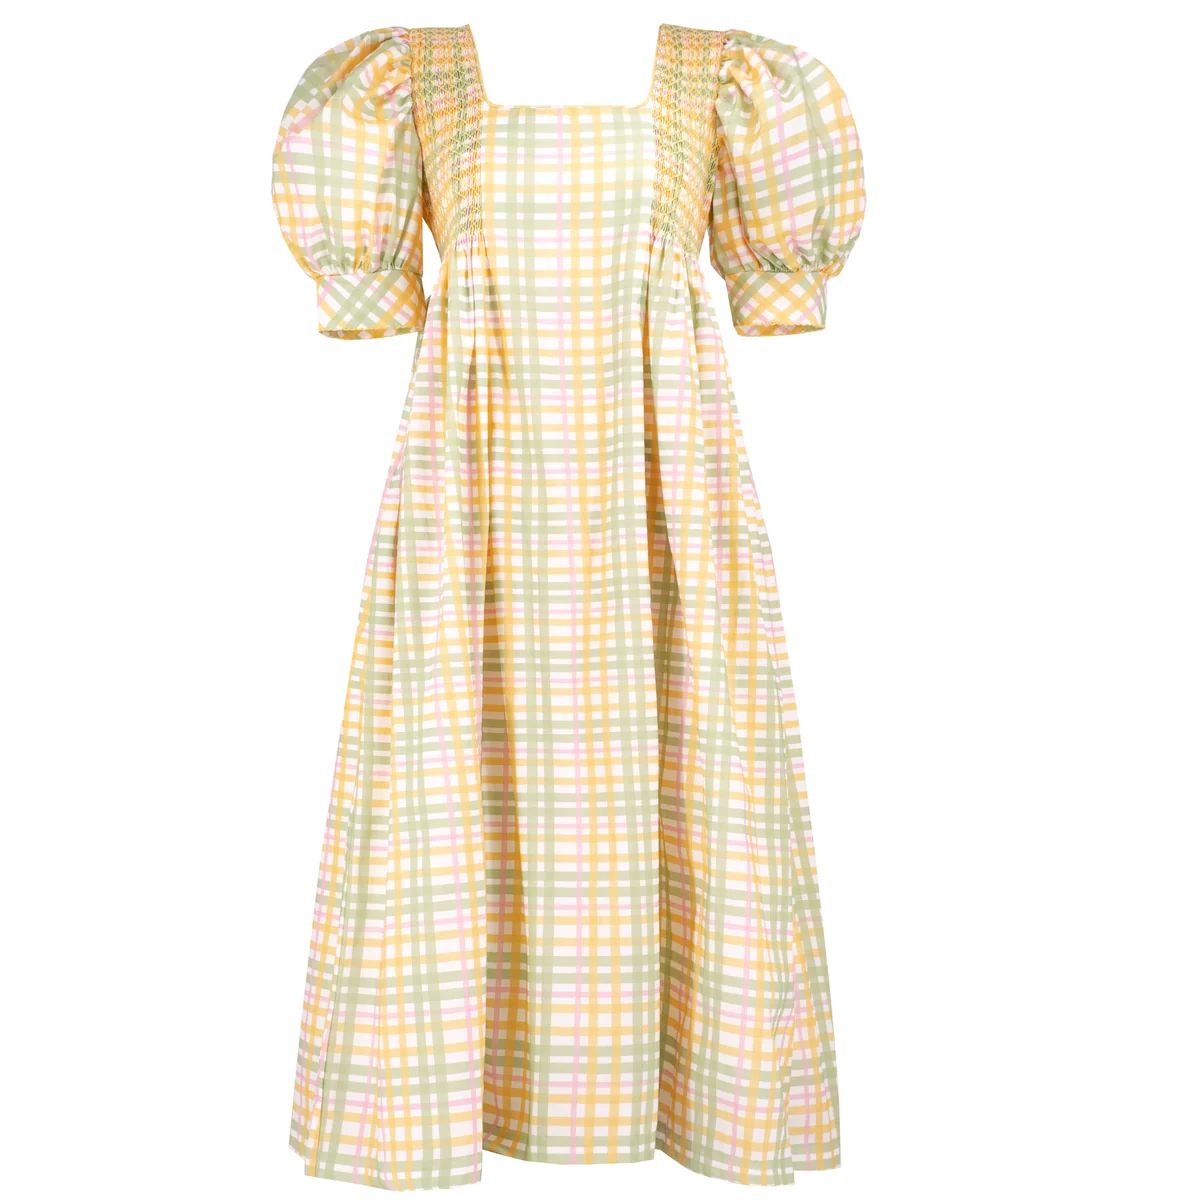 Women's Fall Leaves Dress - Pink Gingham | Dondolo